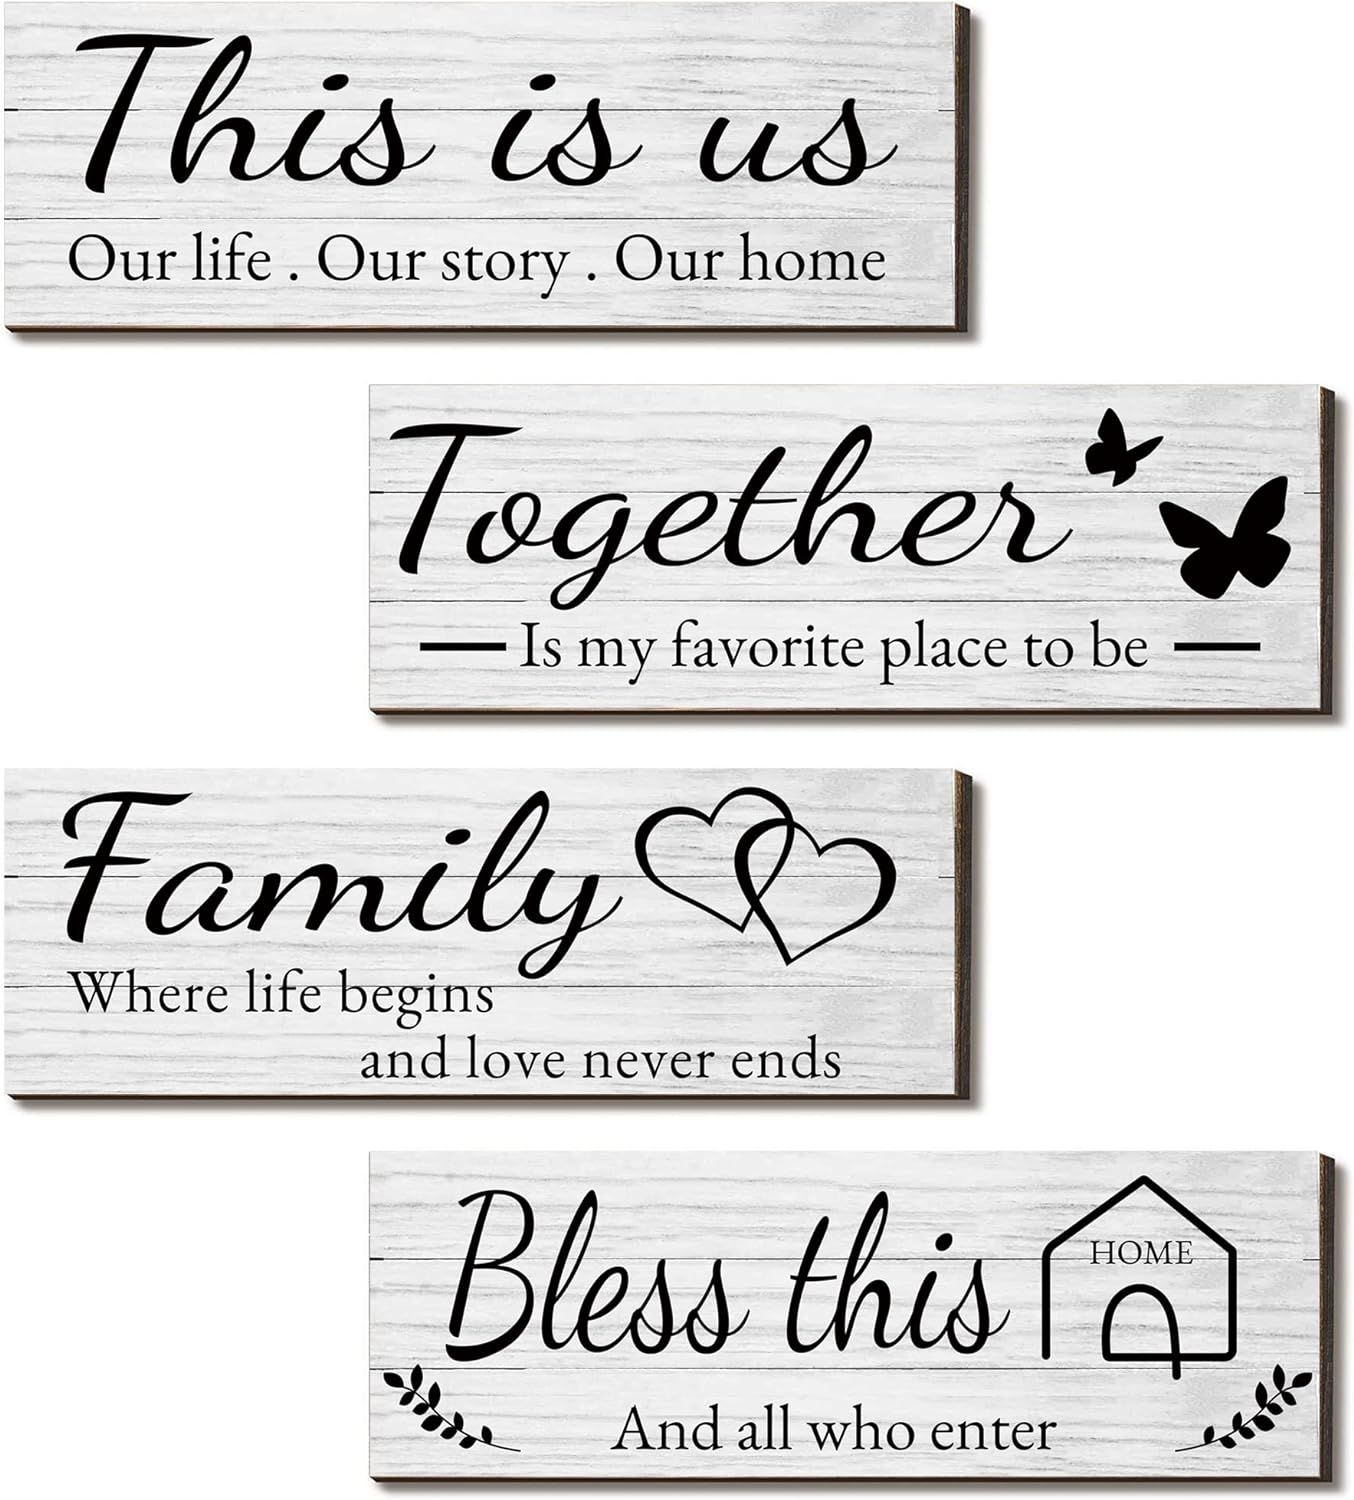 4 Pieces Wooden Home Wall Art Decor, Rustic, Farmhouse THIS IS US/TOGETHER/BLESS THIS HOME/FAMILY... | Amazon (US)